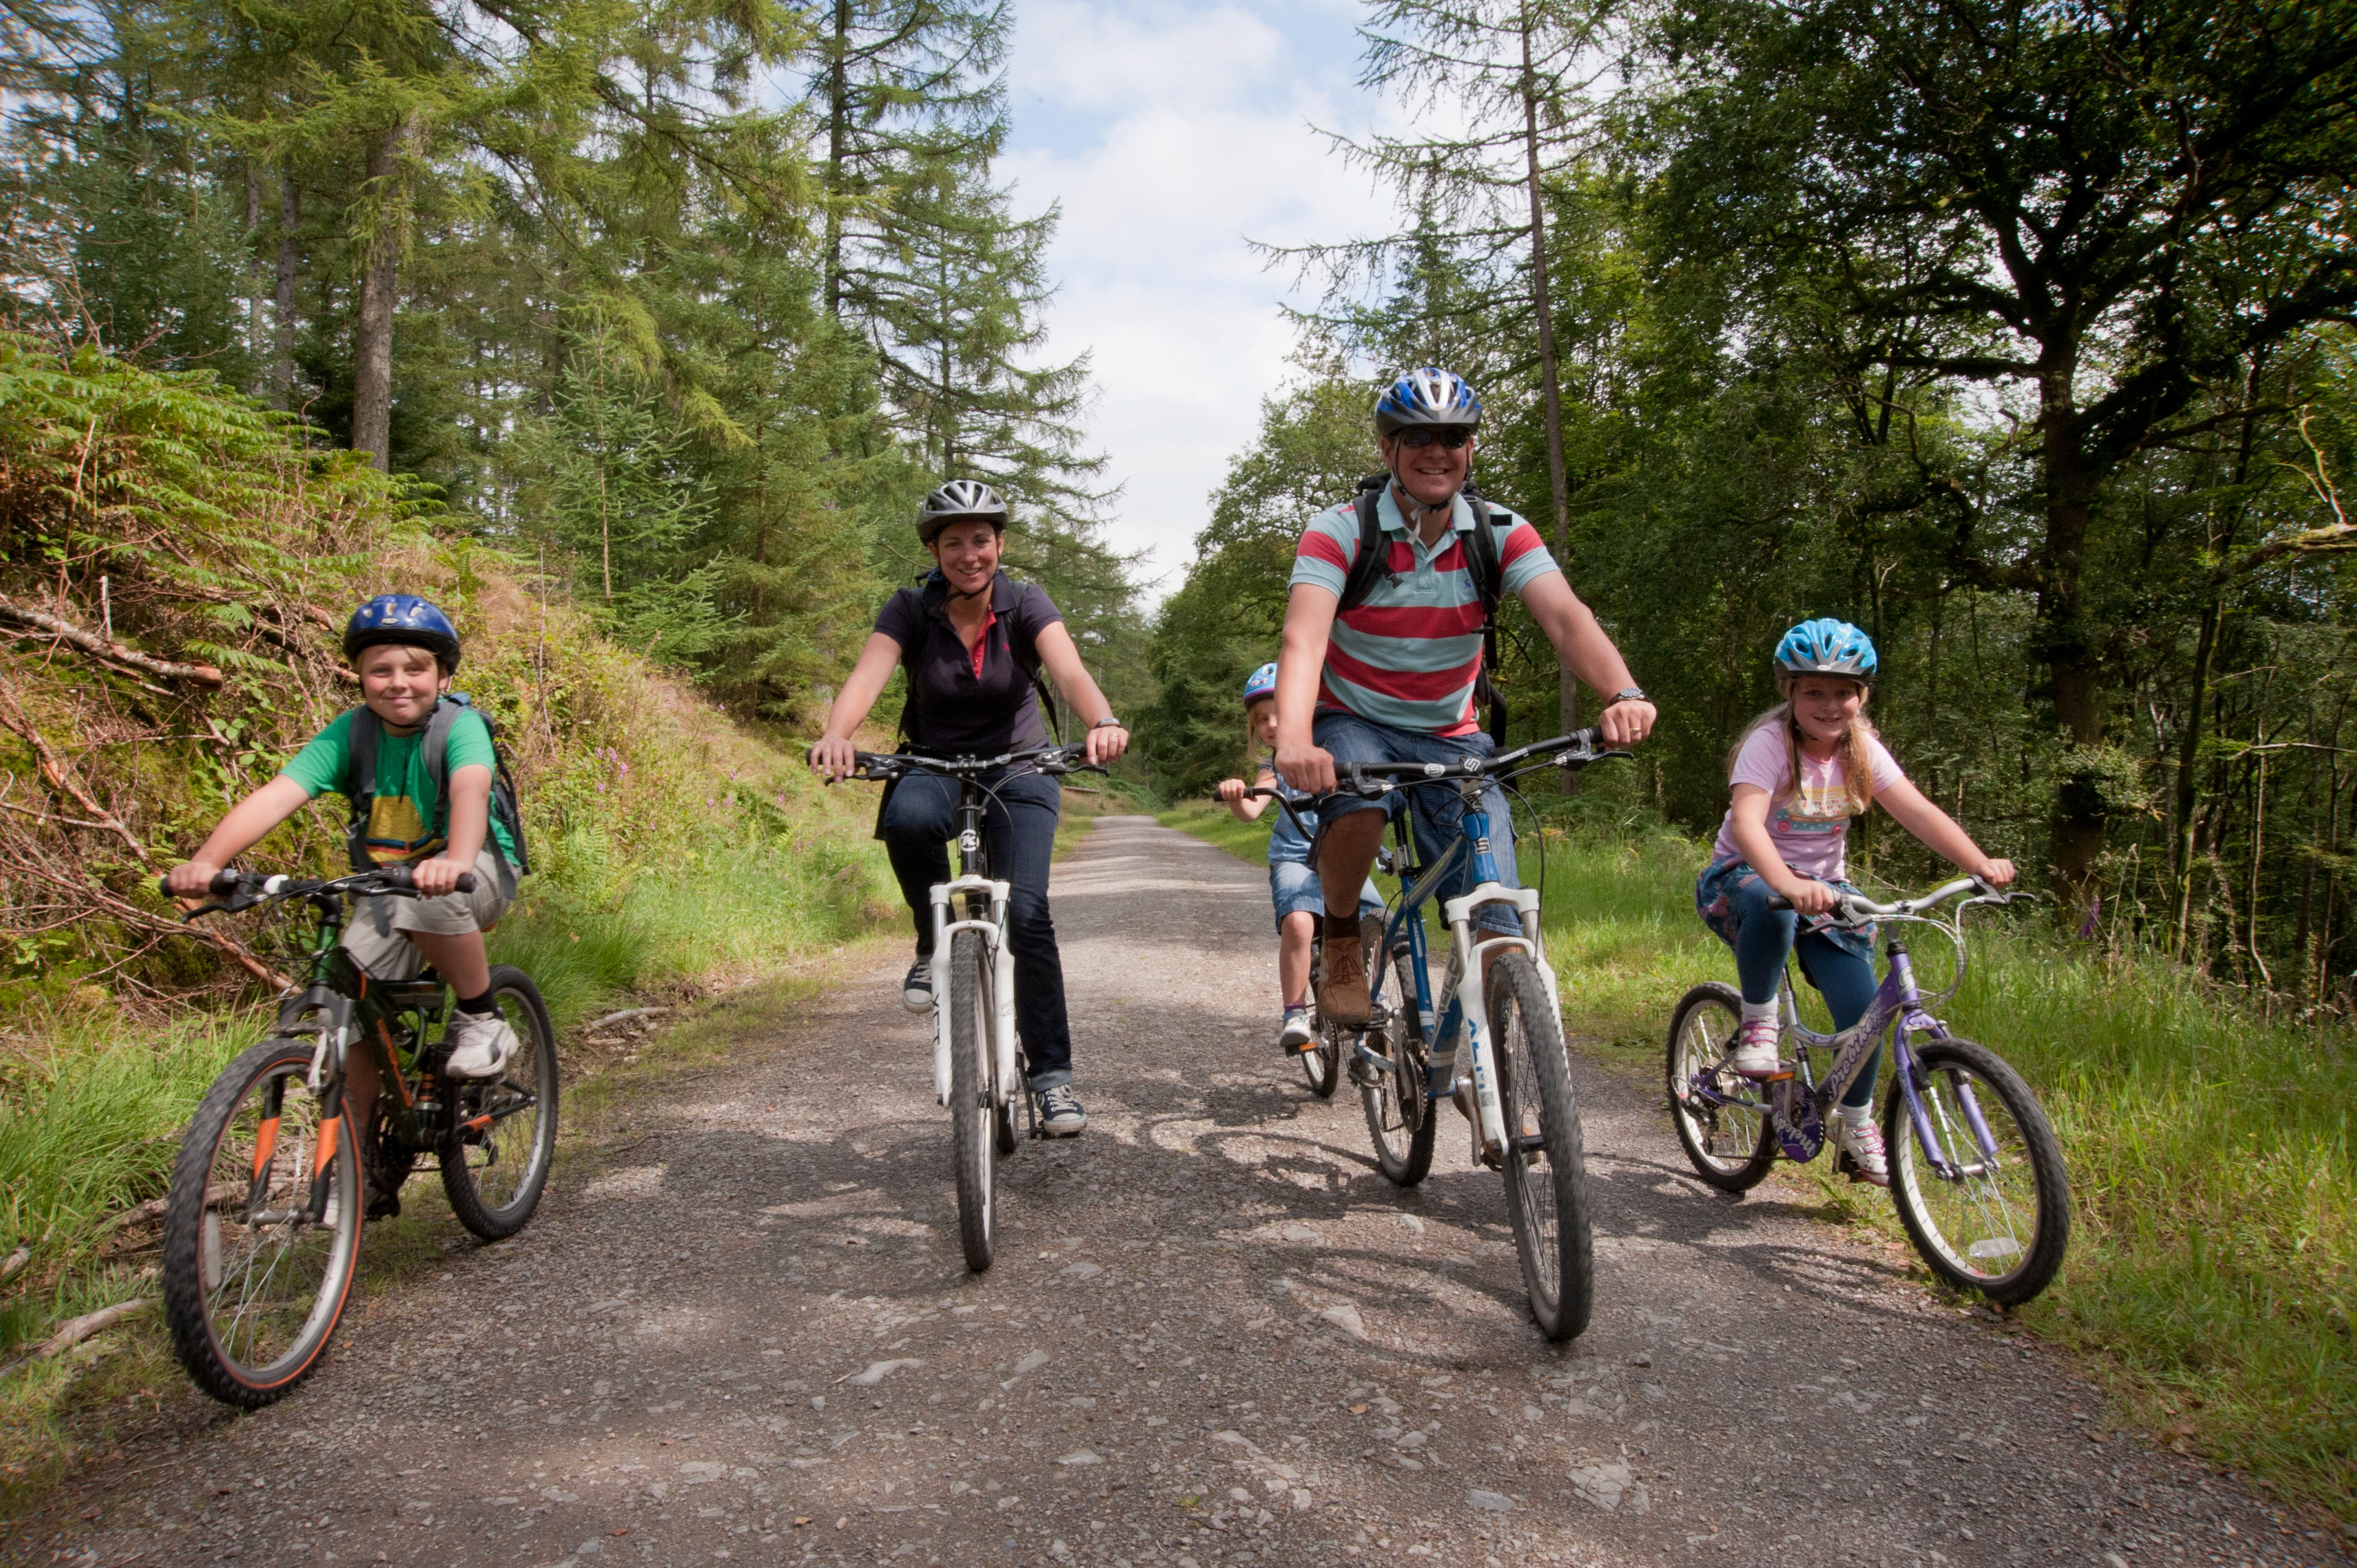 Cycling and mountain biking trails at Sherwood Pines | Forestry England